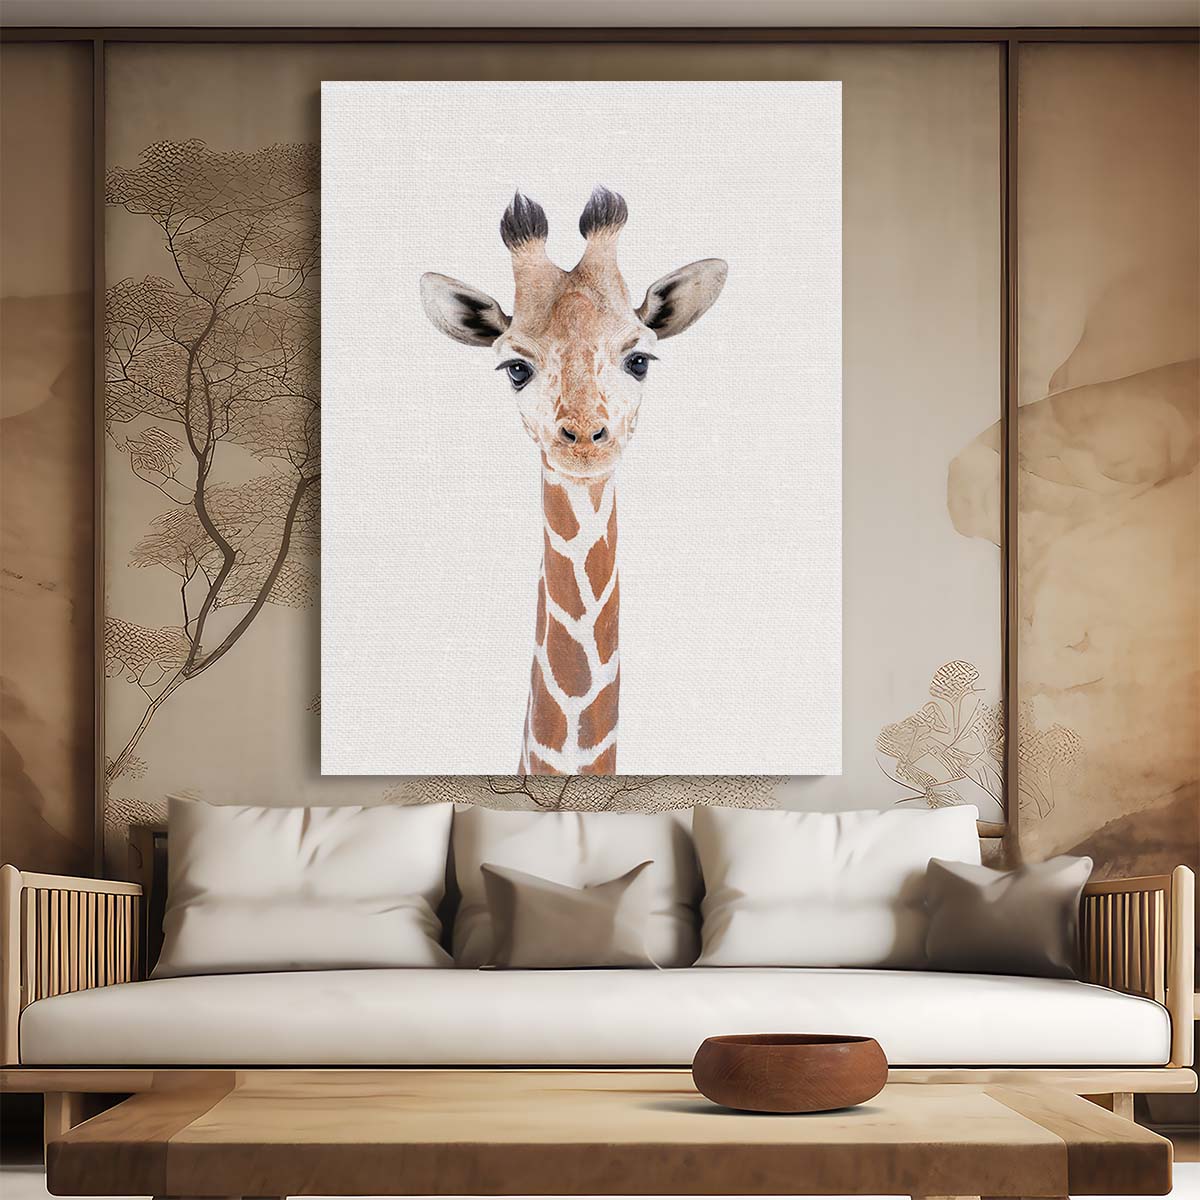 Bright Baby Giraffe Animal Portrait Photography on White Background by Luxuriance Designs, made in USA